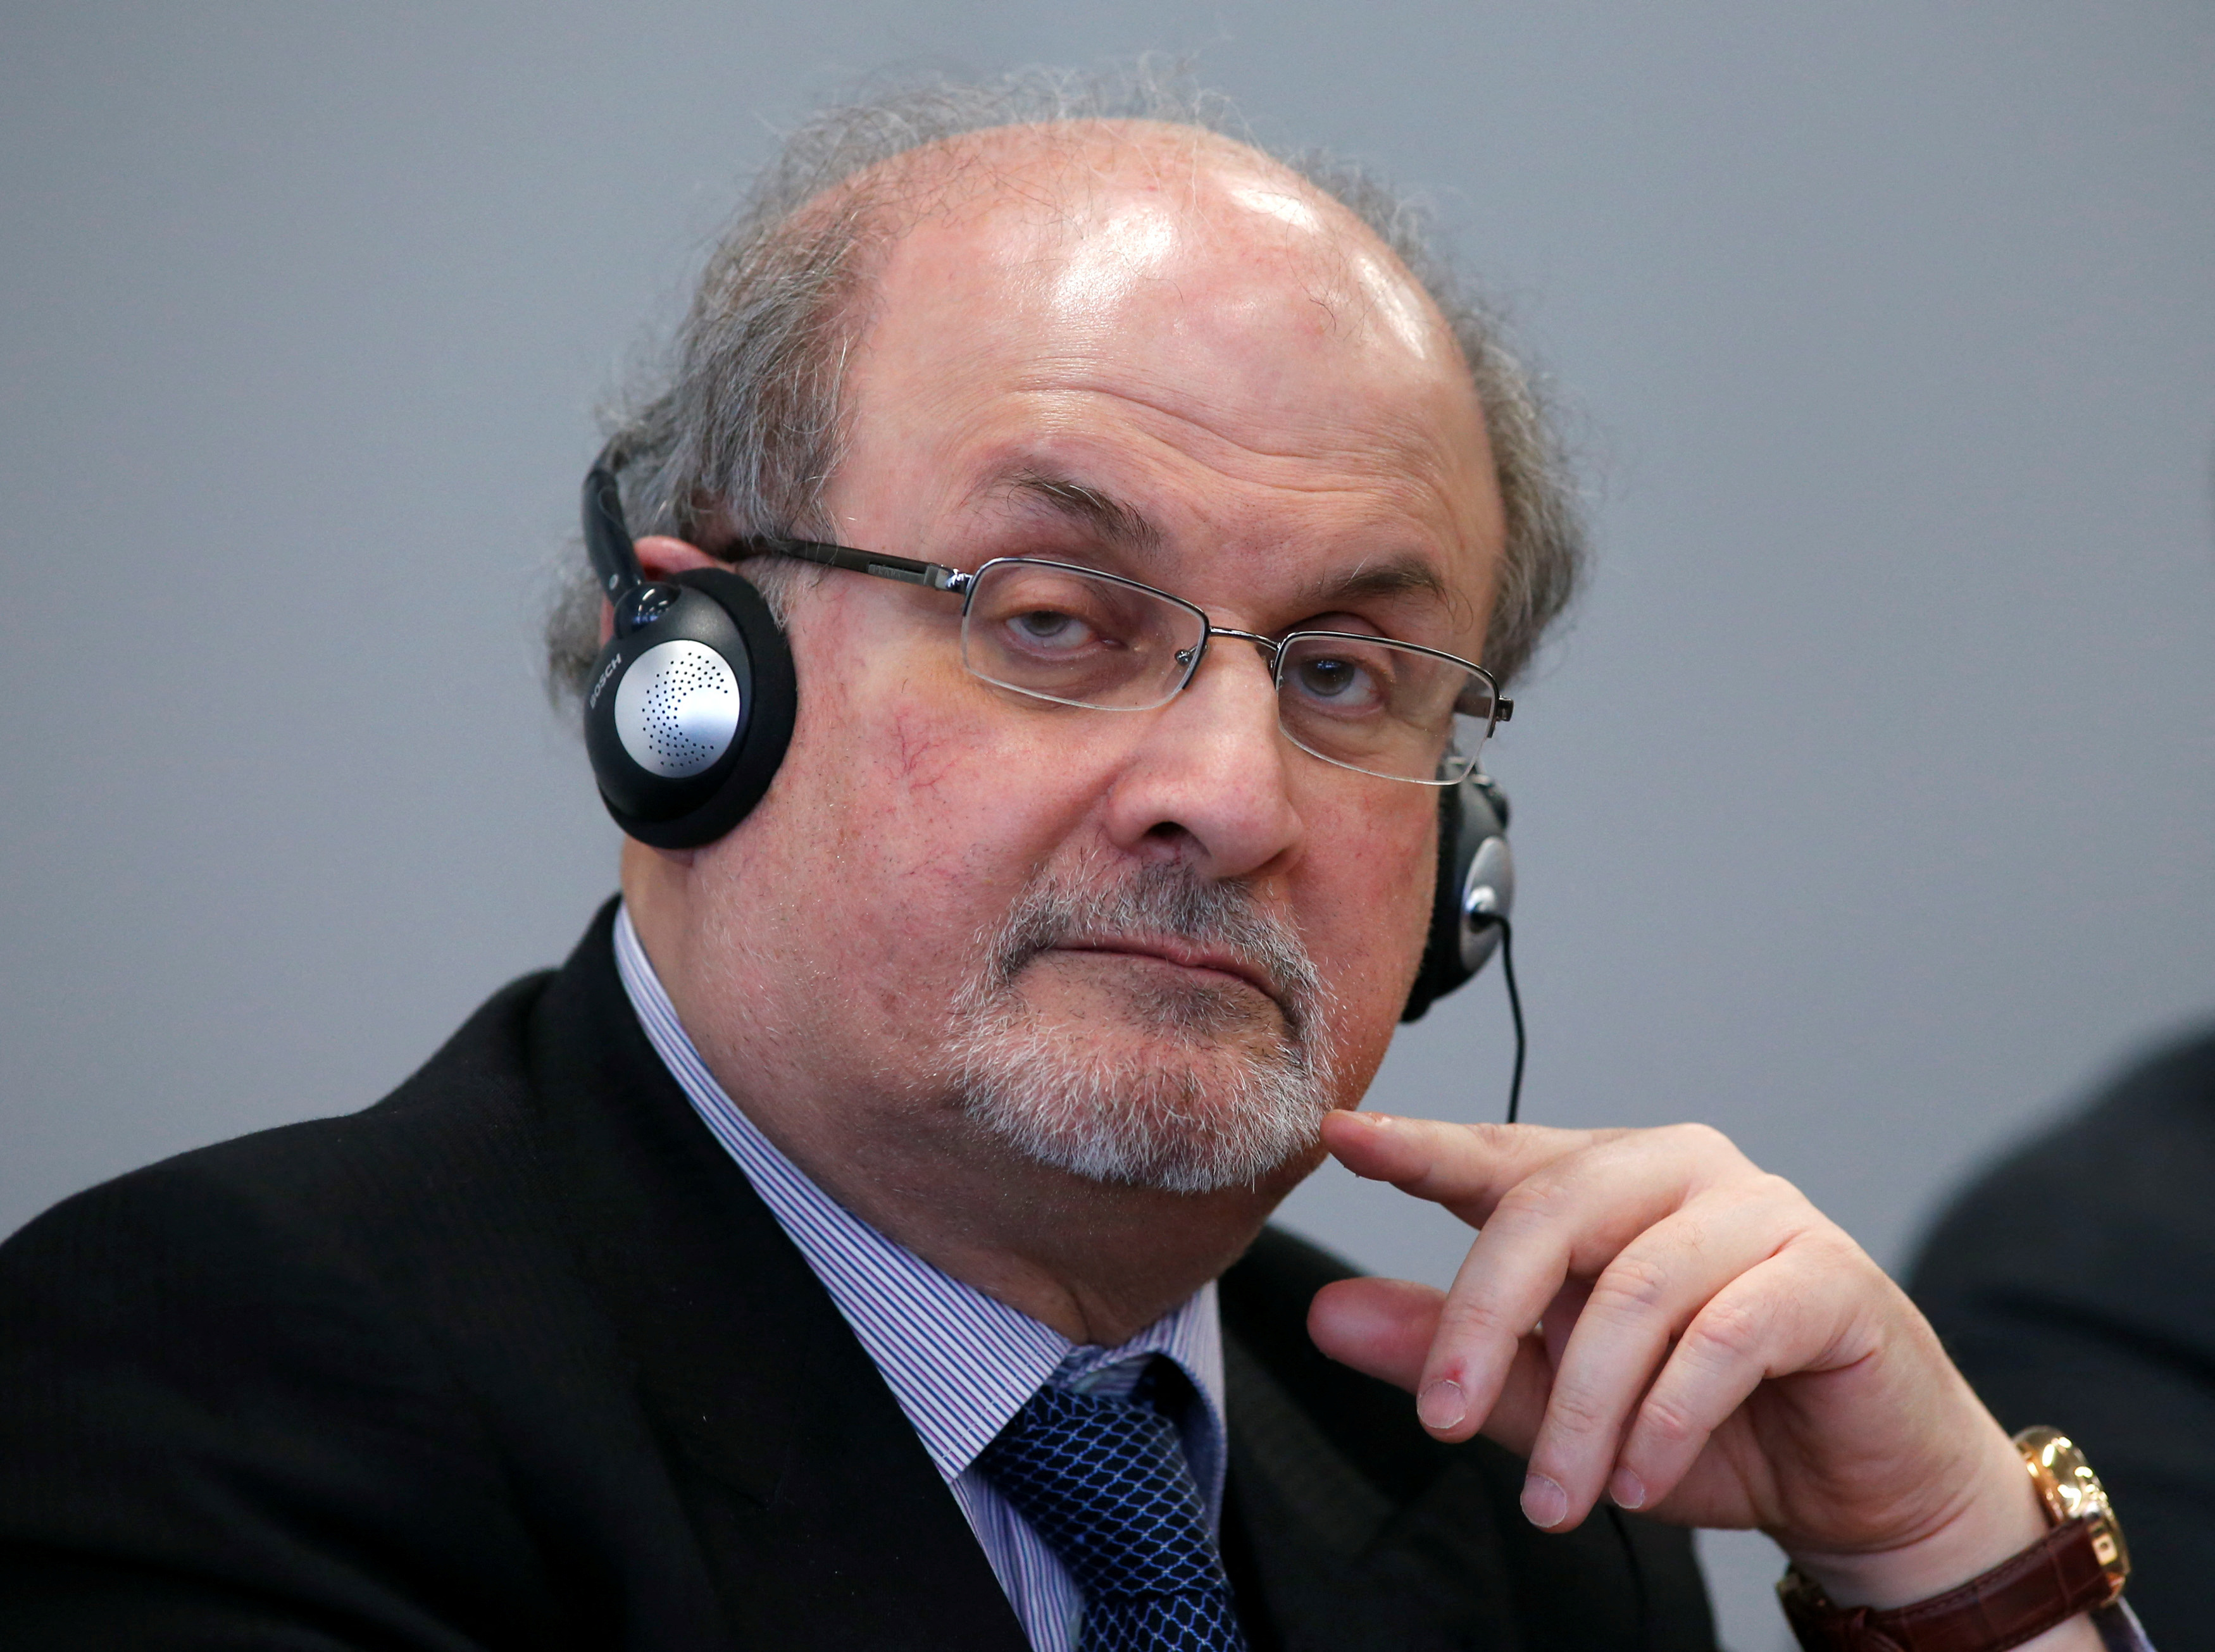 Author Rushdie listens during the opening news conference of the Frankfurt book fair